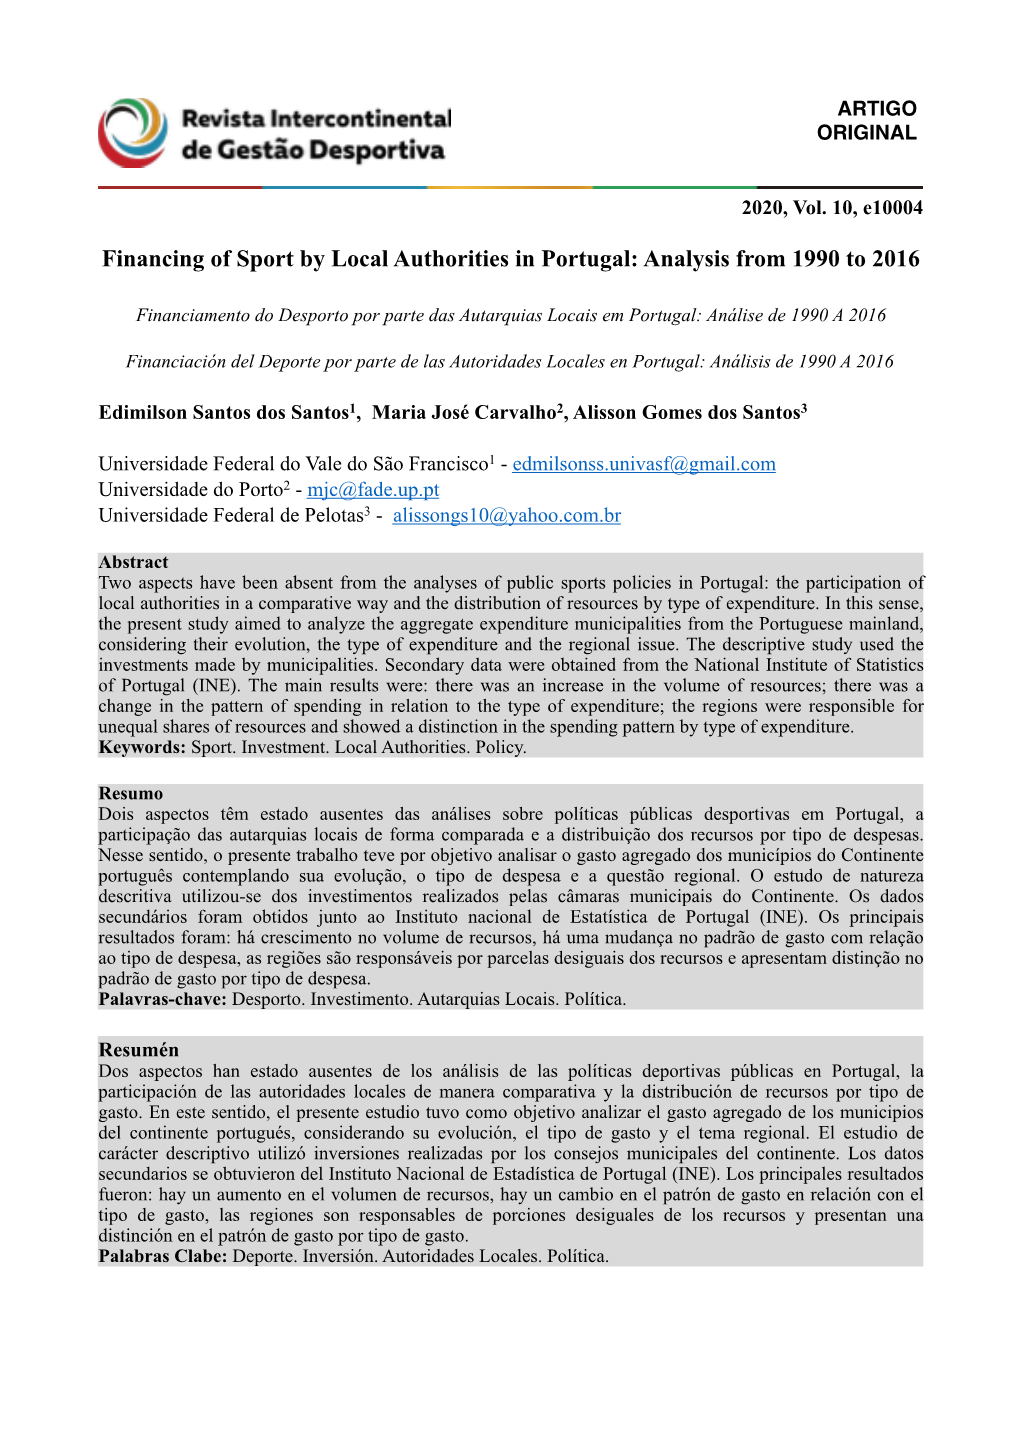 Financing of Sport by Local Authorities in Portugal Analysis from 1990 to 2016